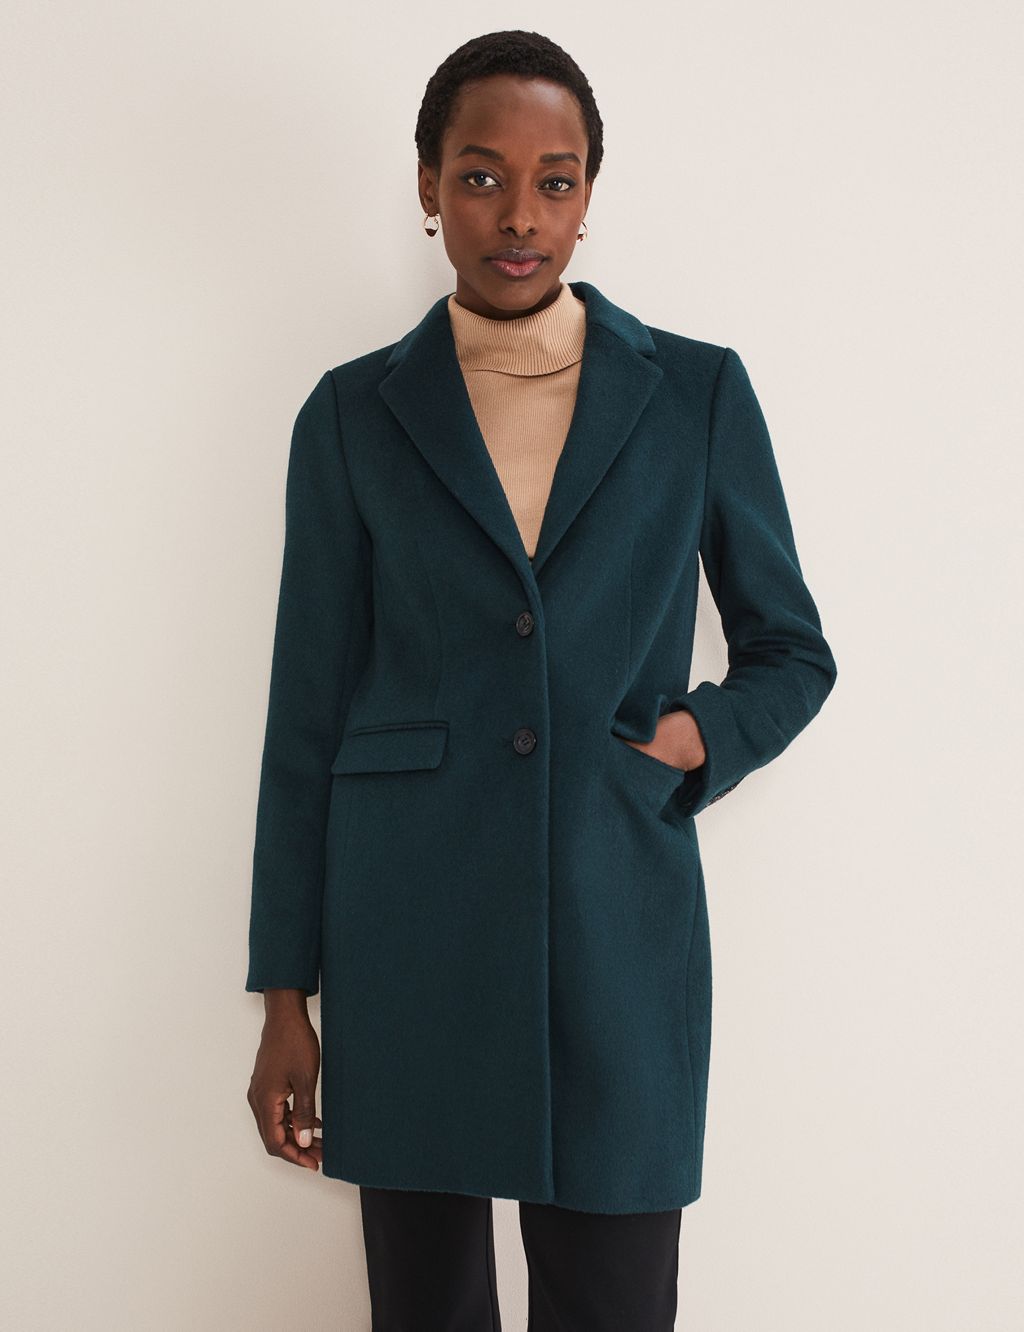 Wool Blend Collared Tailored Coat image 1